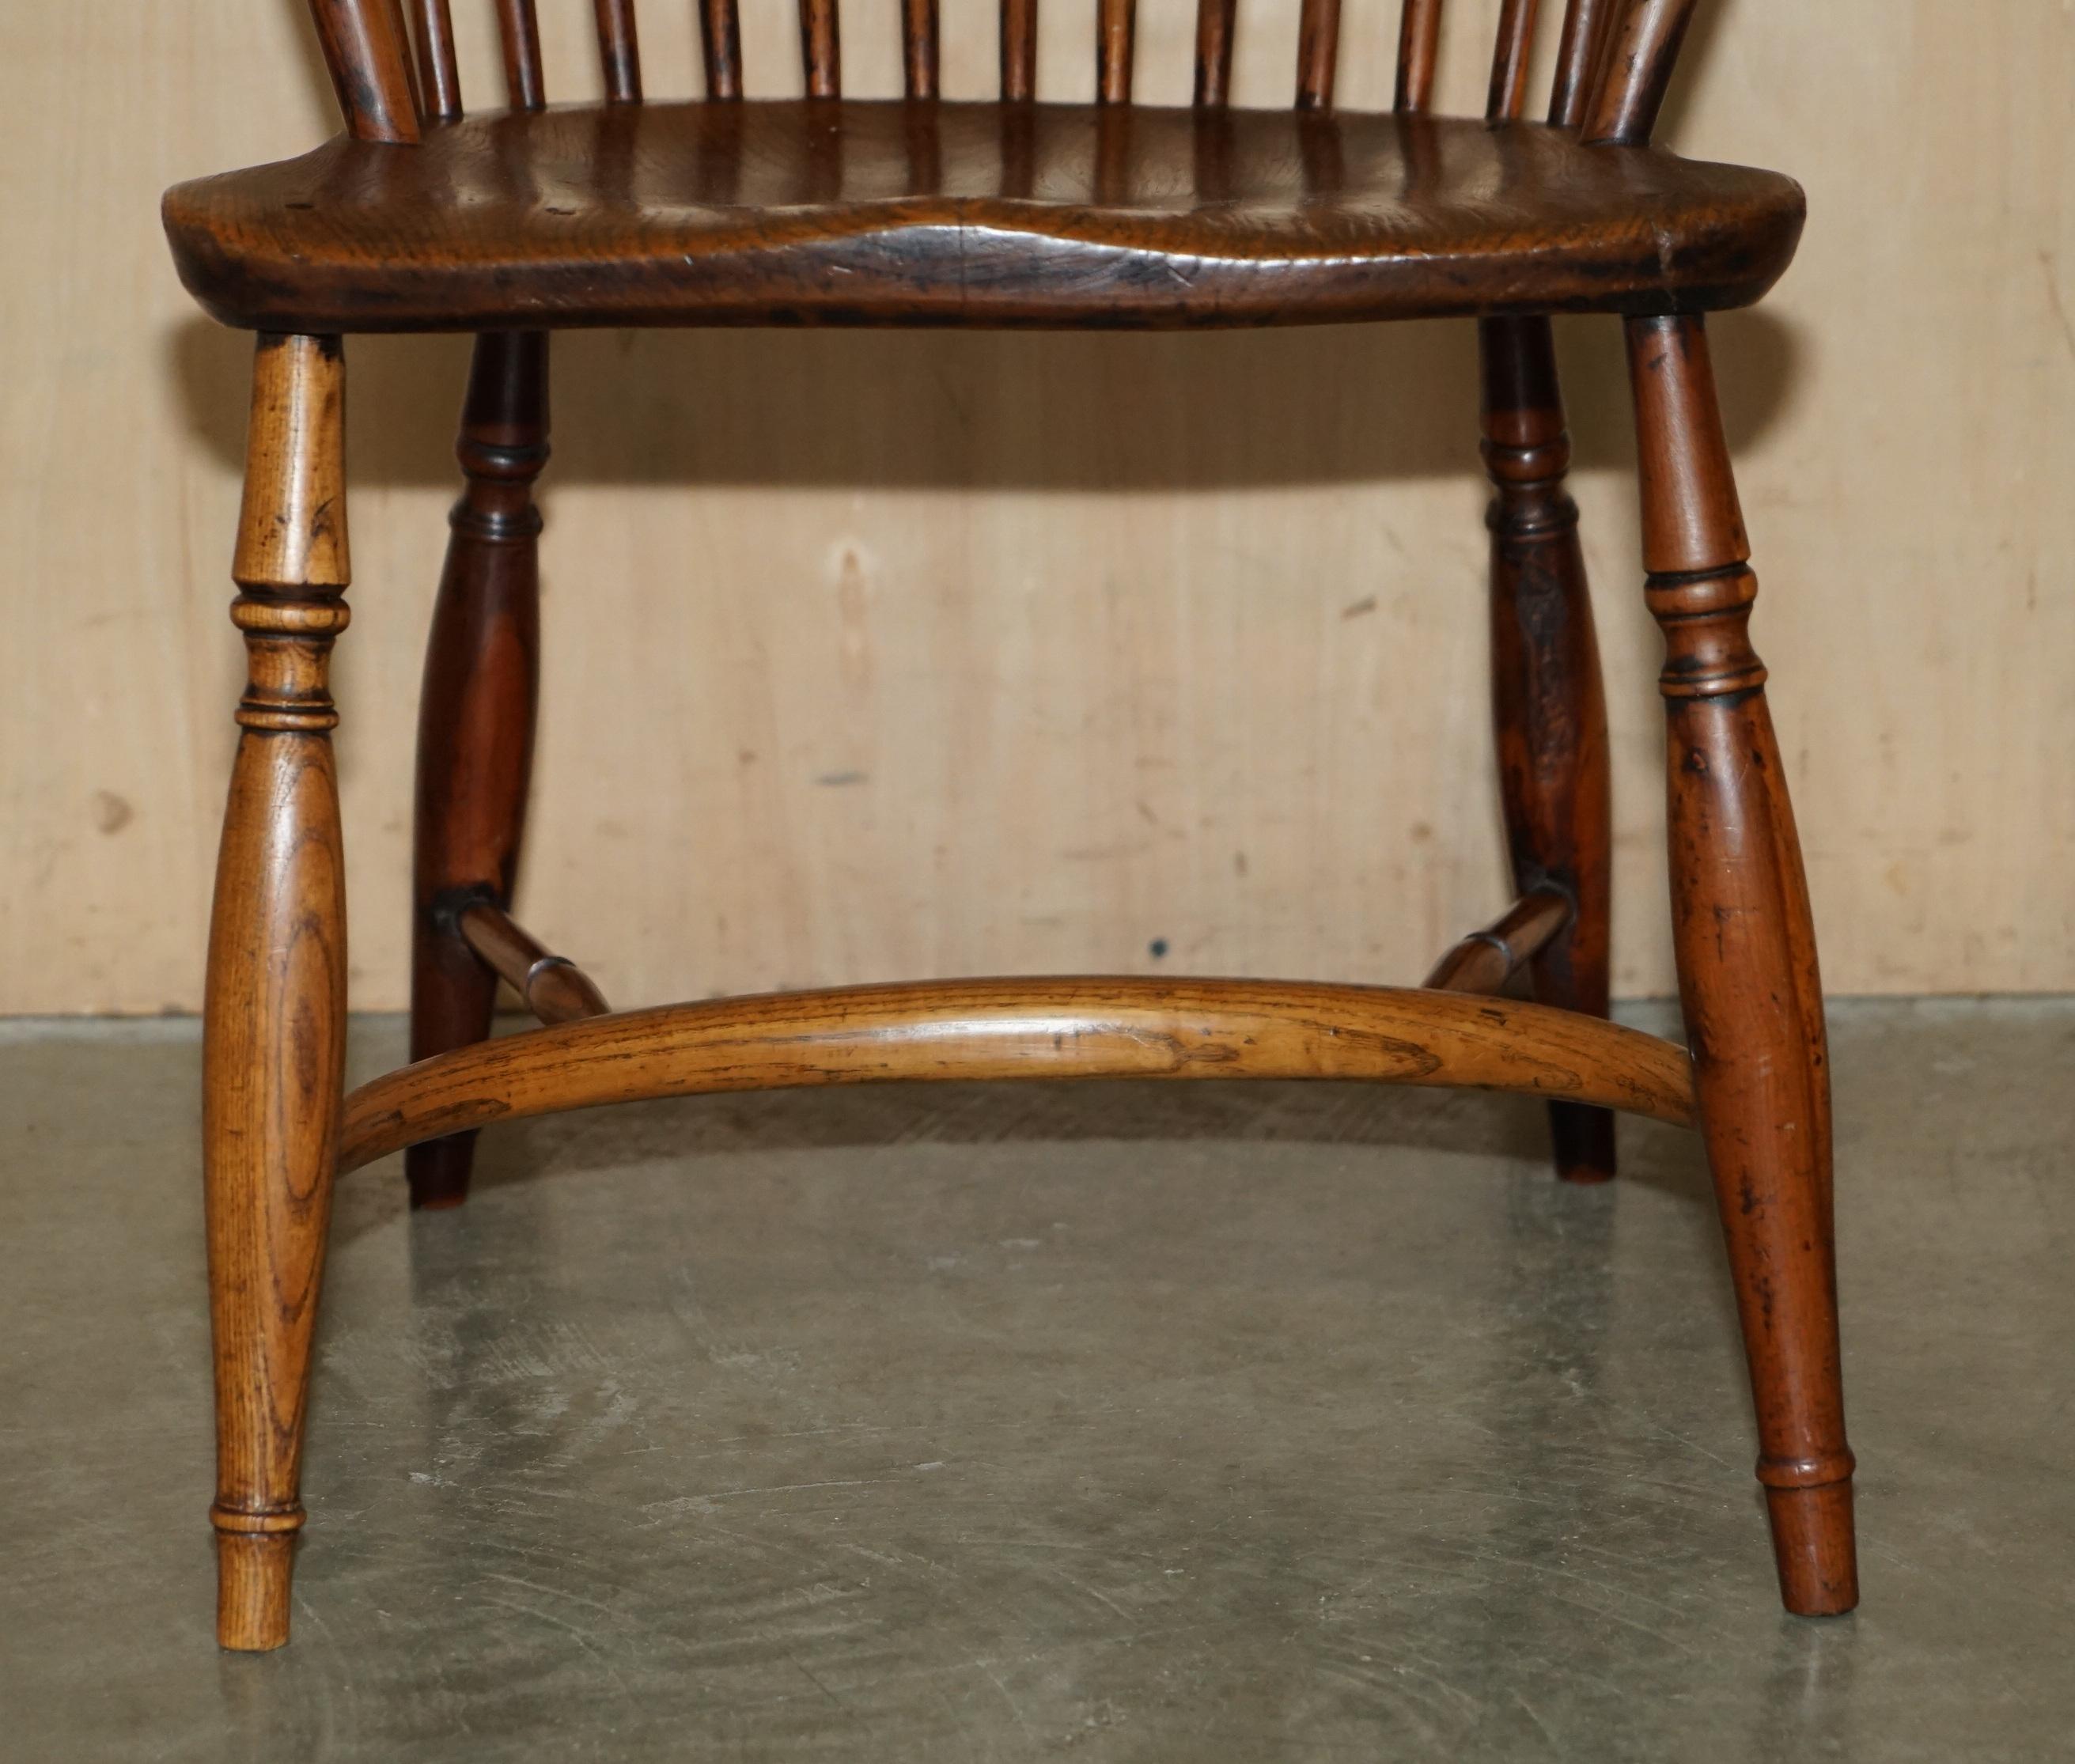 FINE ANTiQUE EARLY 19TH CENTURY BURR YEW WOOD & ELM COMB BACK WINDSOR ARMCHAIR For Sale 2